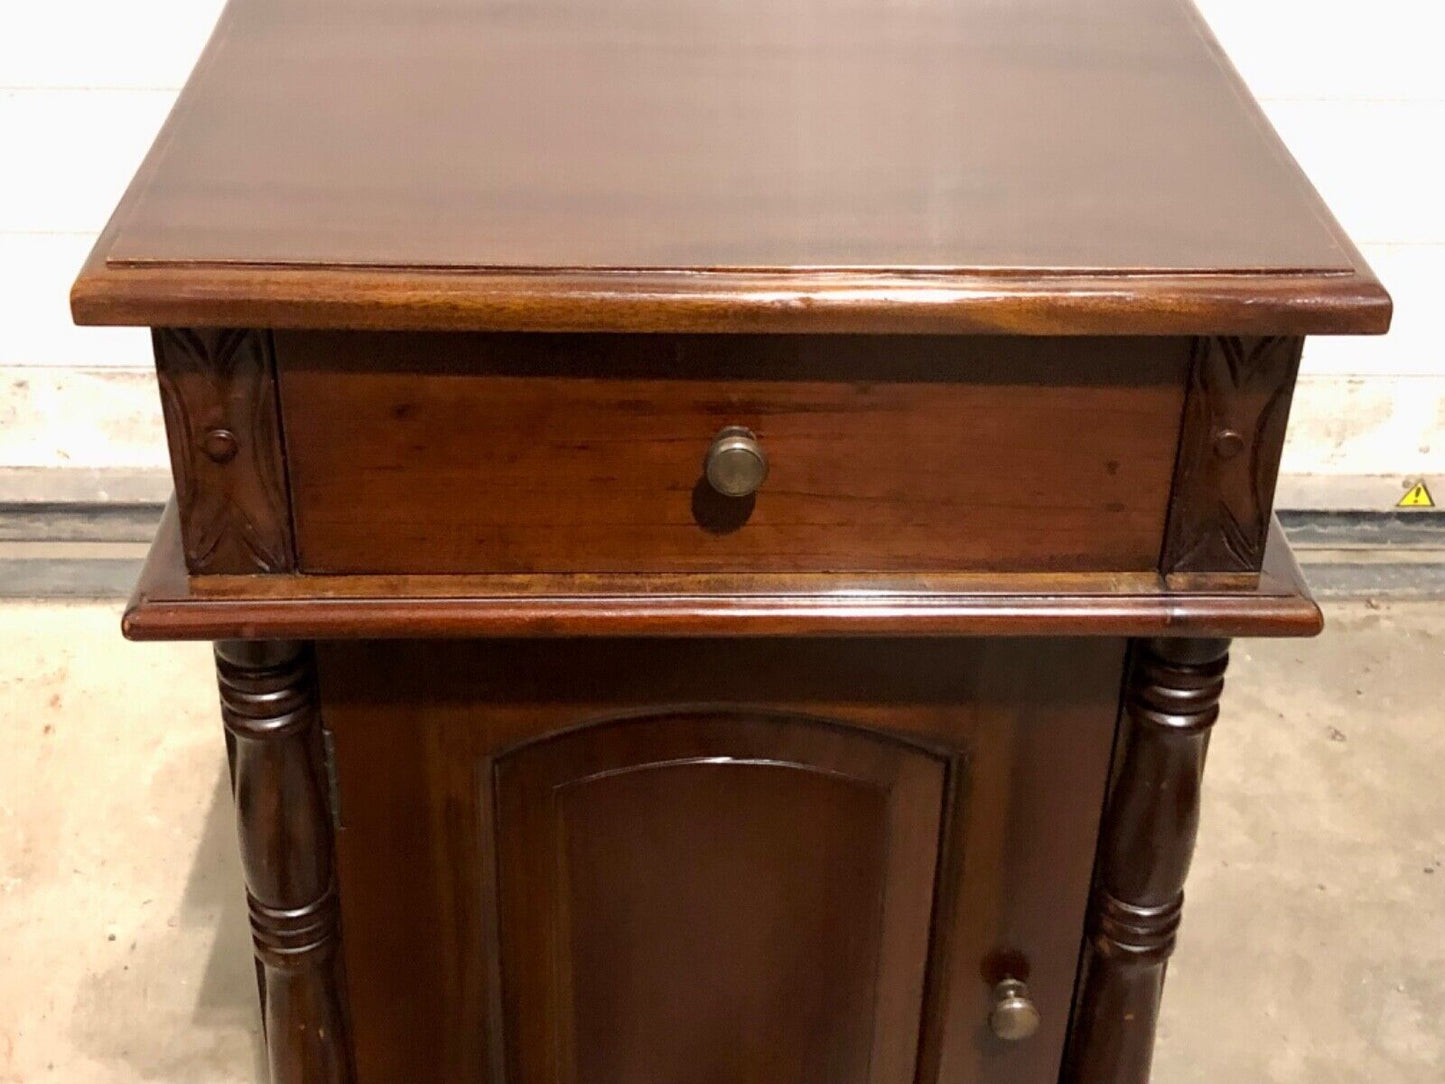 000753....Handsome Pair Of Vintage Mahogany Bedside Tables / Nightstands